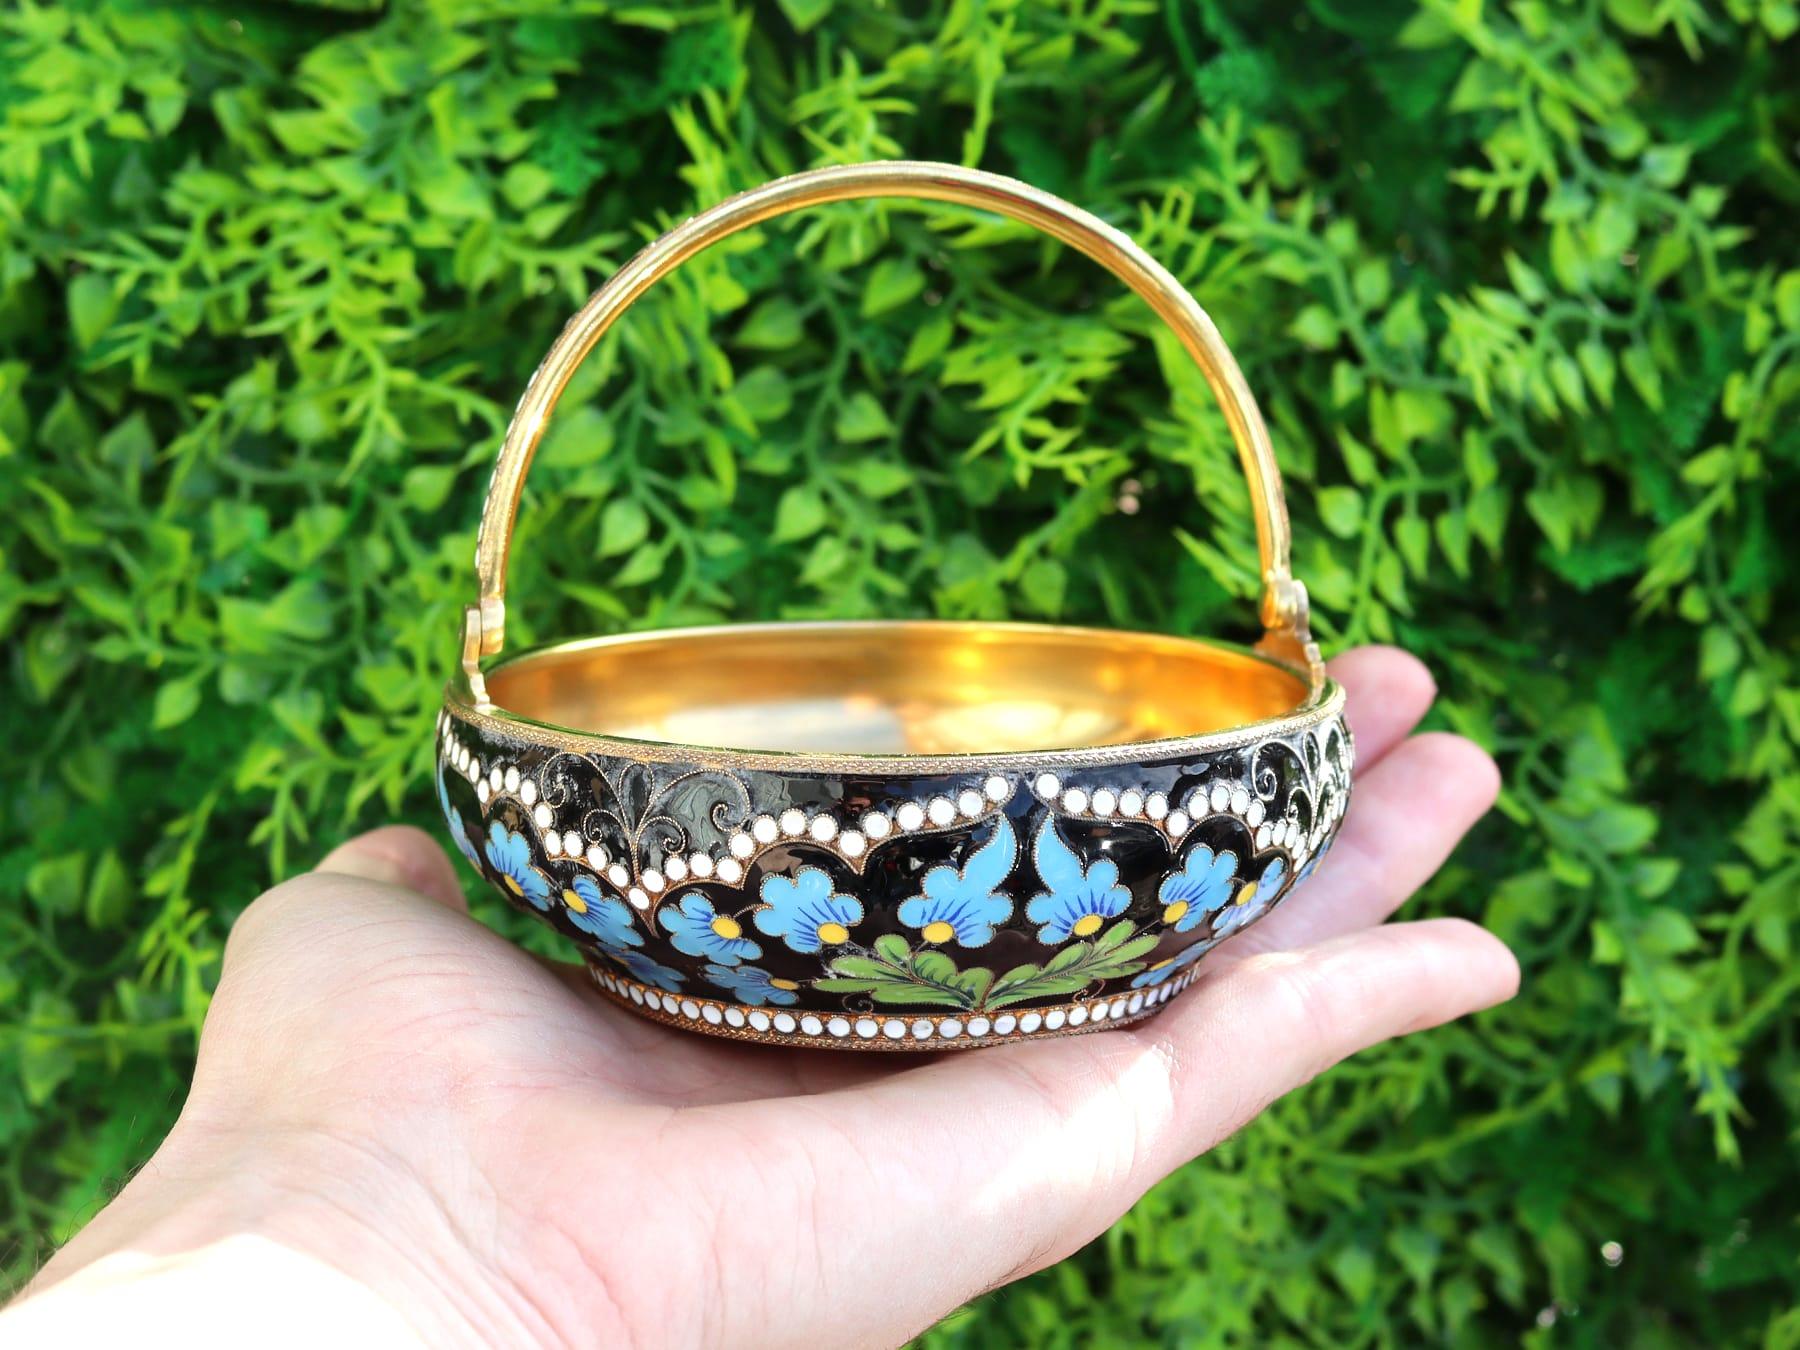 An exceptional, fine and impressive vintage Russian silver and polychrome cloisonné enamel sugar basket; an addition to our diverse silver teaware collection

This exceptional vintage Russian silver sugar basket has a plain circular form.

The